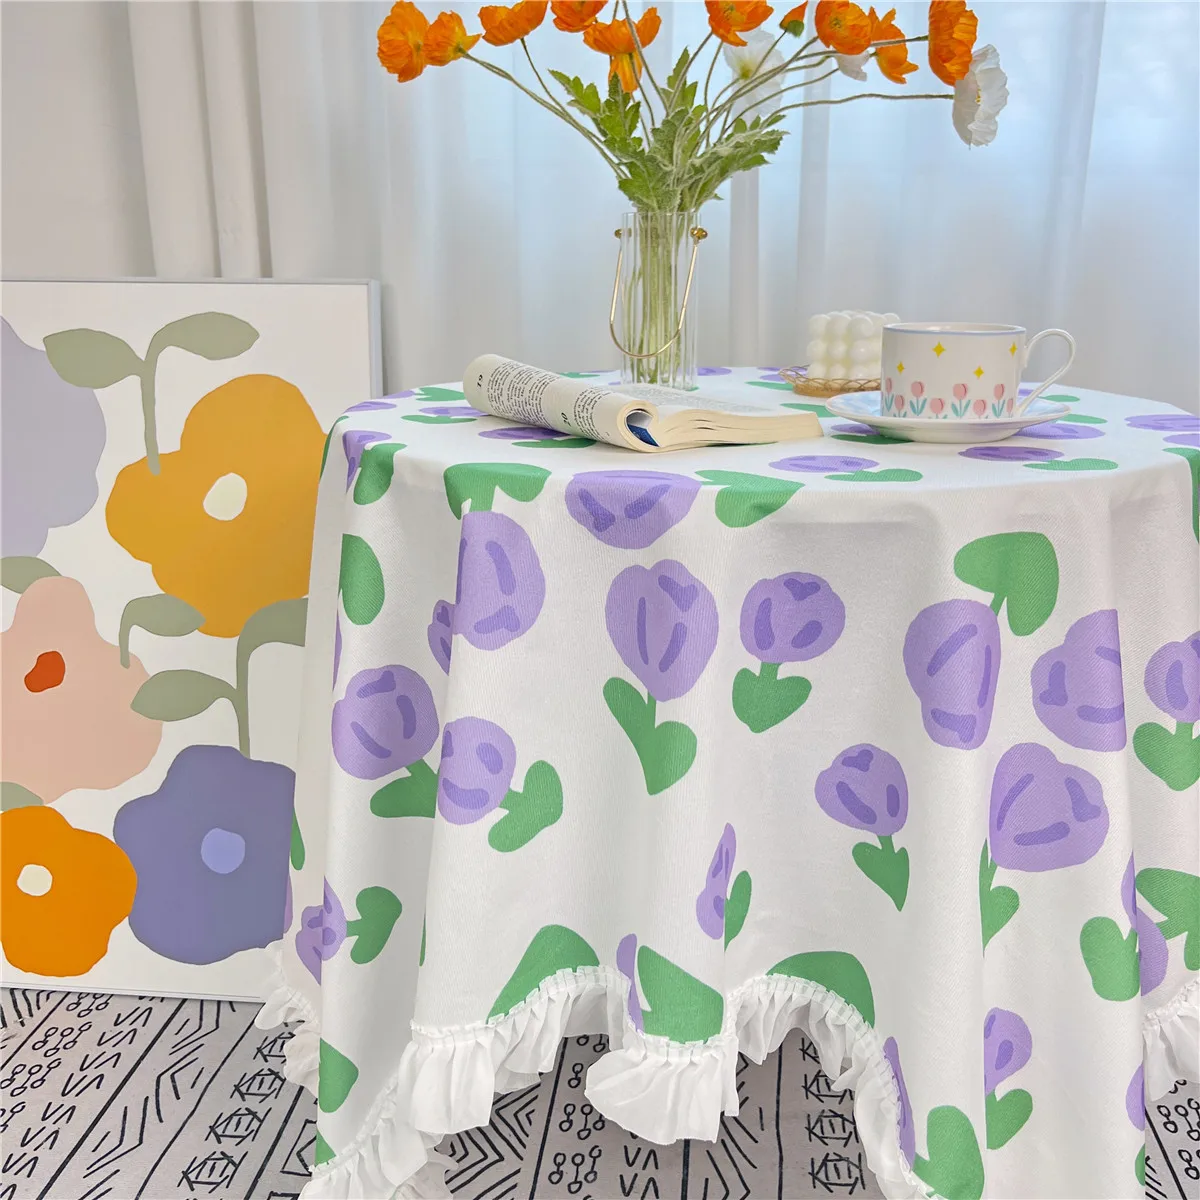 

Pastoral style tablecloth with ruffle edge technology, flannel tablecloth cover